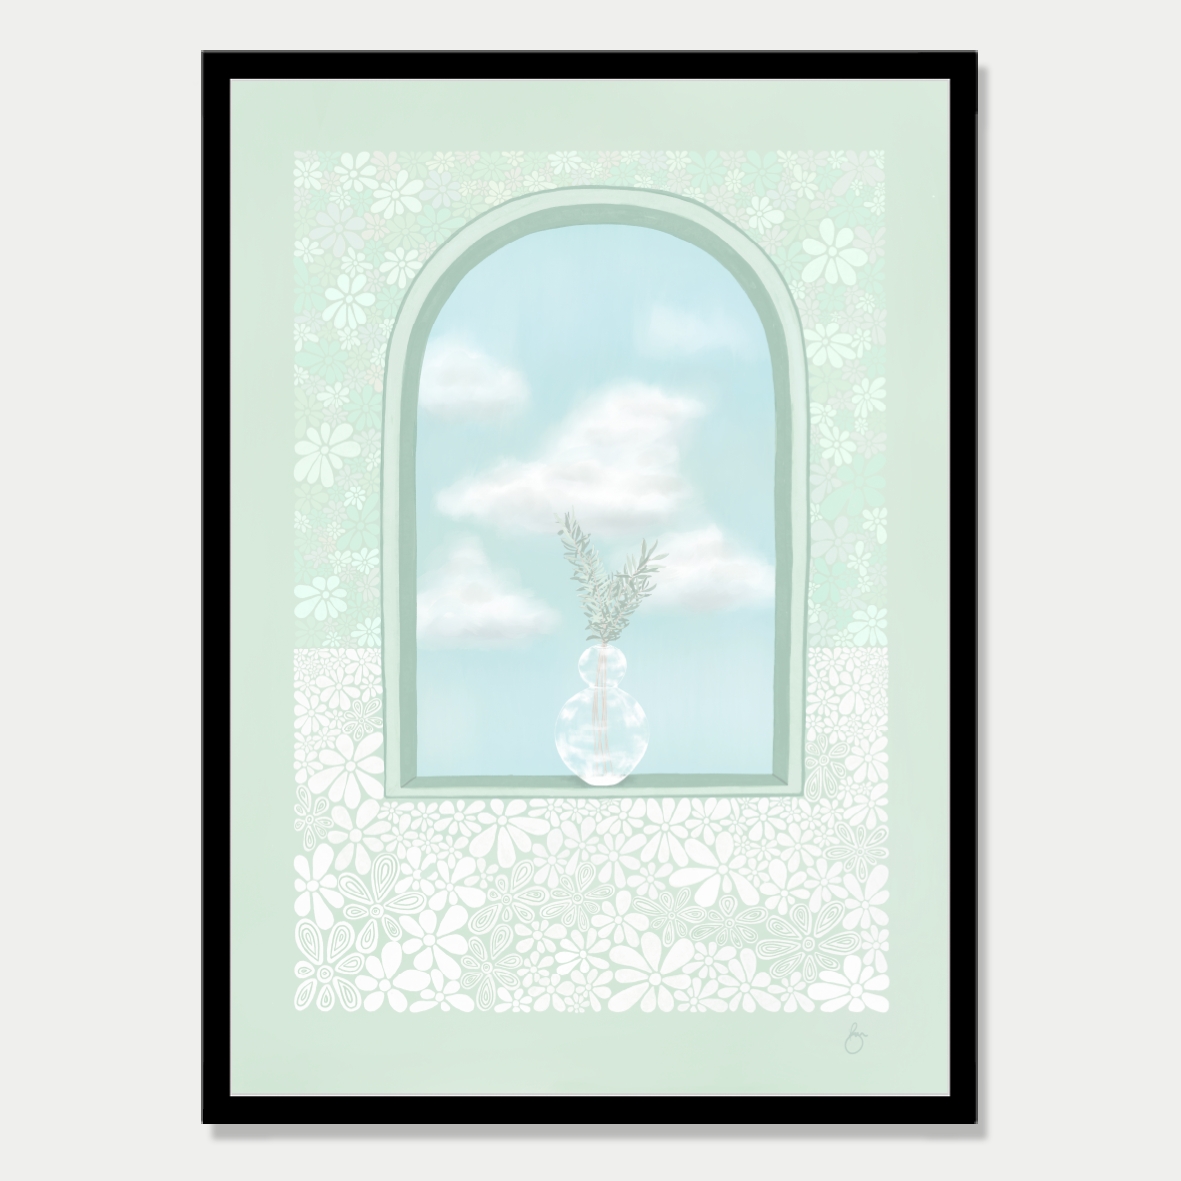 Art print of an arched window with a plant sitting in it and a view of fluffy clouds, in a pastel mint colour palette, by Bon Jung. Printed in New Zealand by endemicworld and framed in black.